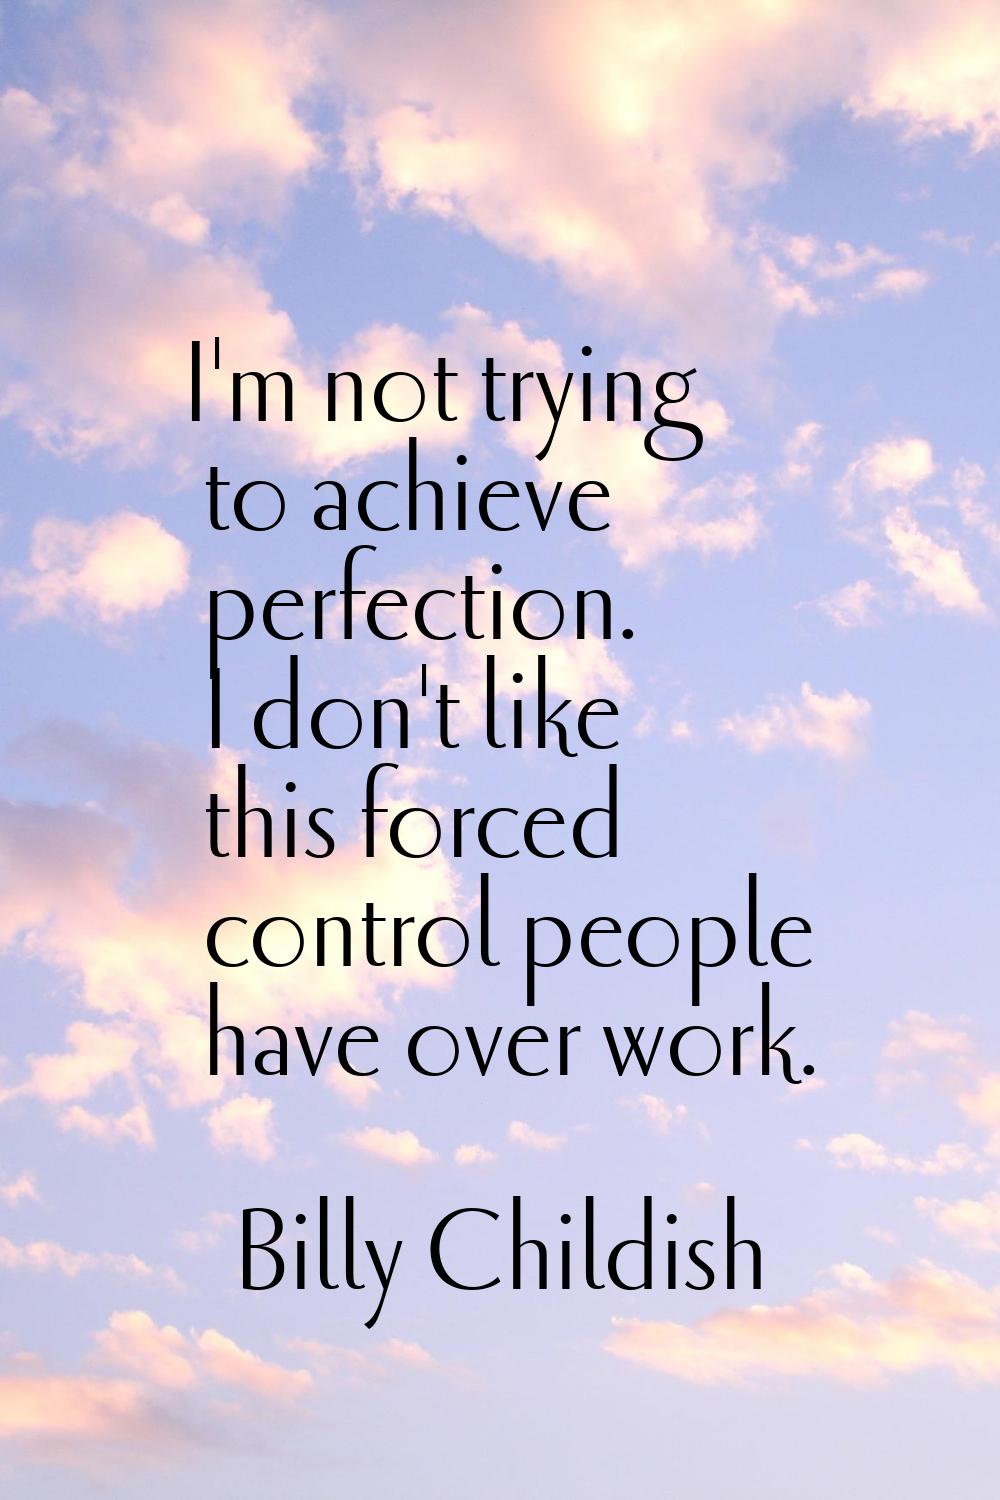 I'm not trying to achieve perfection. I don't like this forced control people have over work.